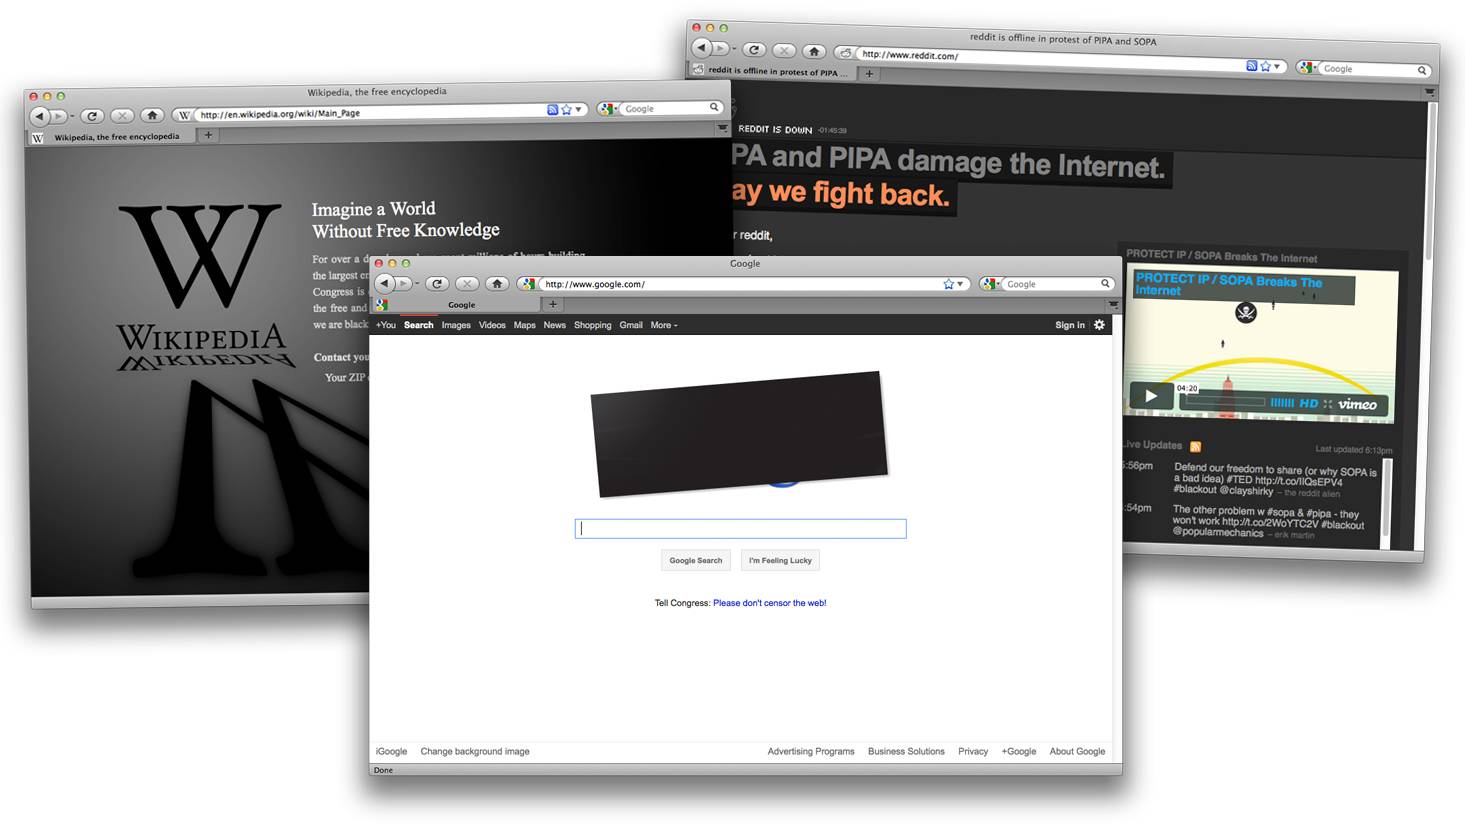 Internet Sites Black Out - In the first strike of its kind, thousands of popular sites — including Wikipedia, Boing Boing, Reddit and others —&nbsp;shut down for up to 24 hours on Wednesday in an online grass-roots protest against the Stop Online Piracy Act (SOPA) and the Protect Intellectual Property Act (PIPA).(Photos: Courtesy of Wikipedia.com/Google.com/Reddit.com)